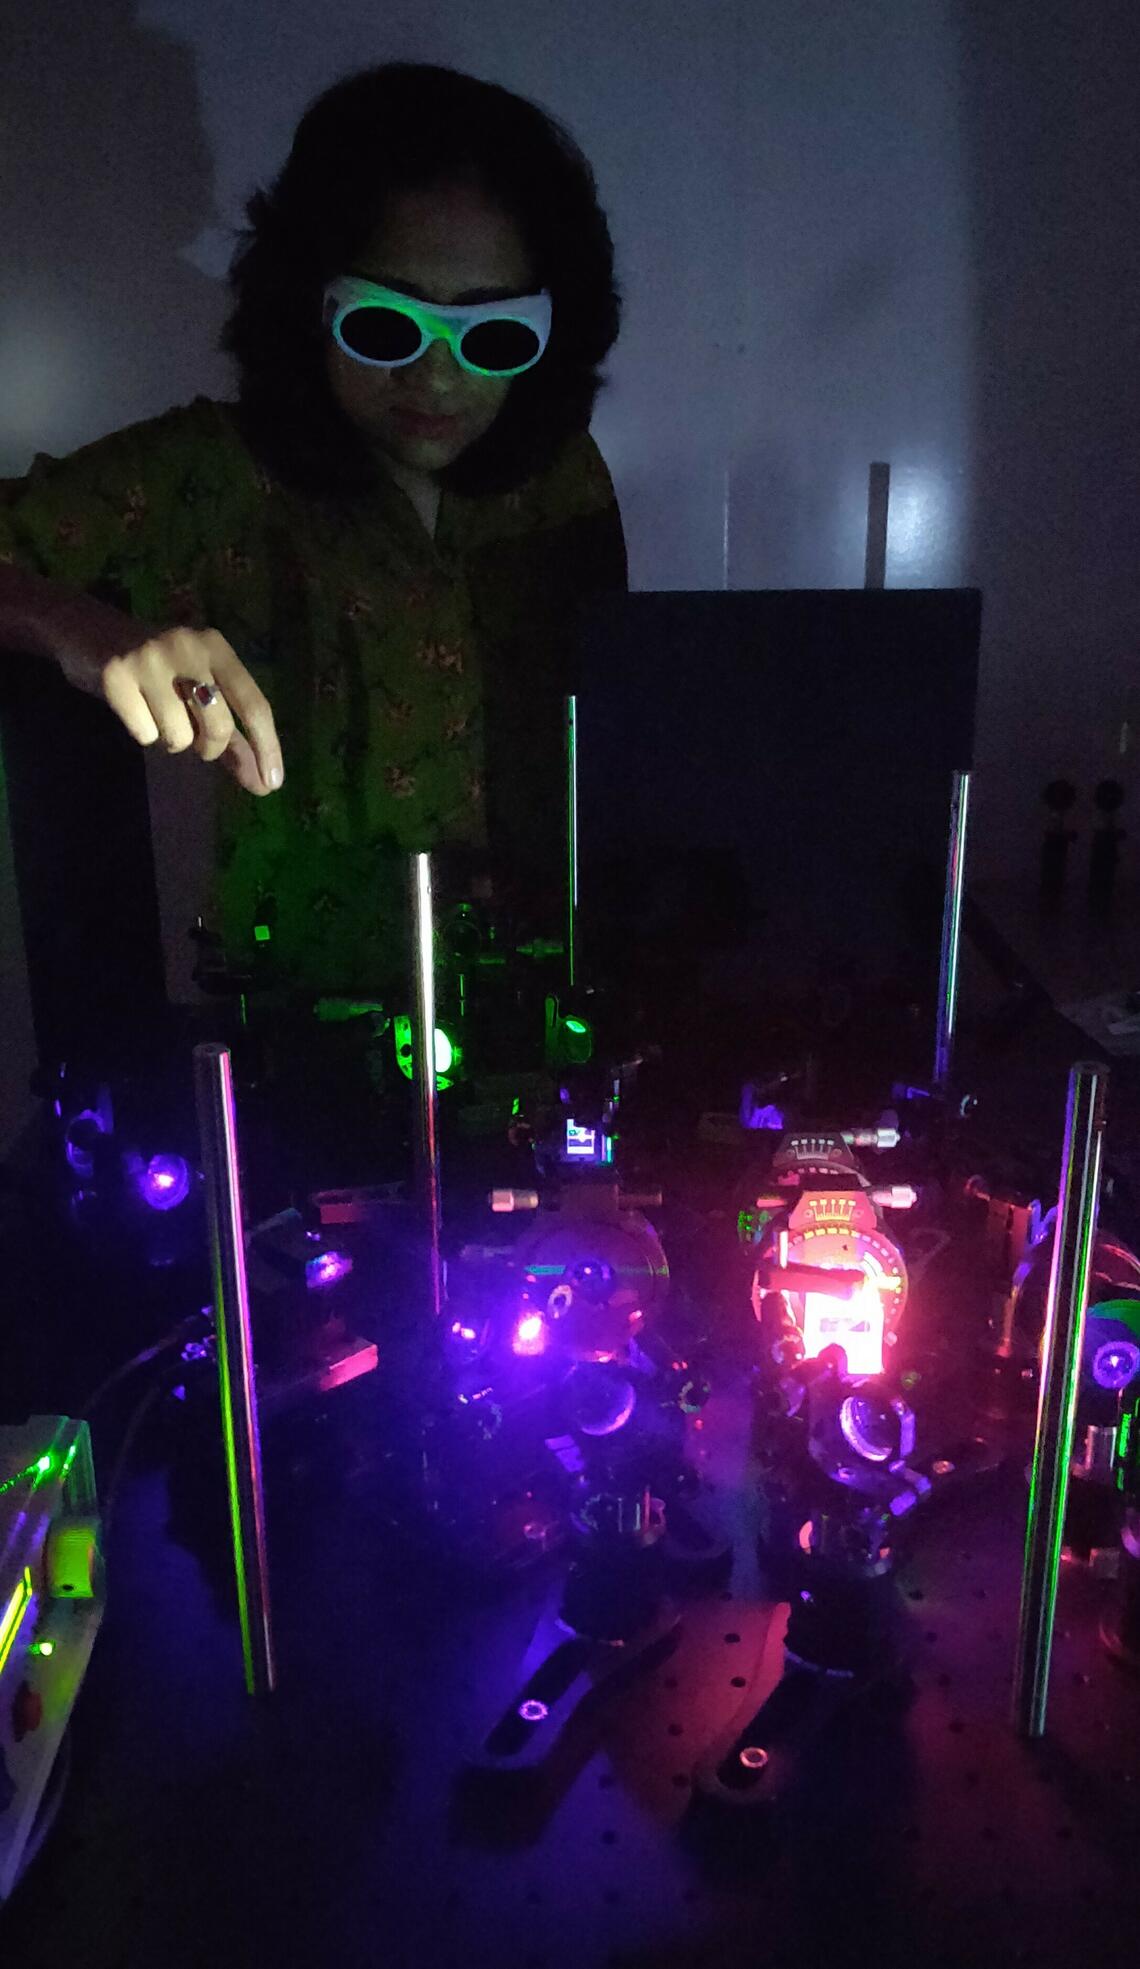 Urbasi Sinha working with quantum equipment in her lab in India